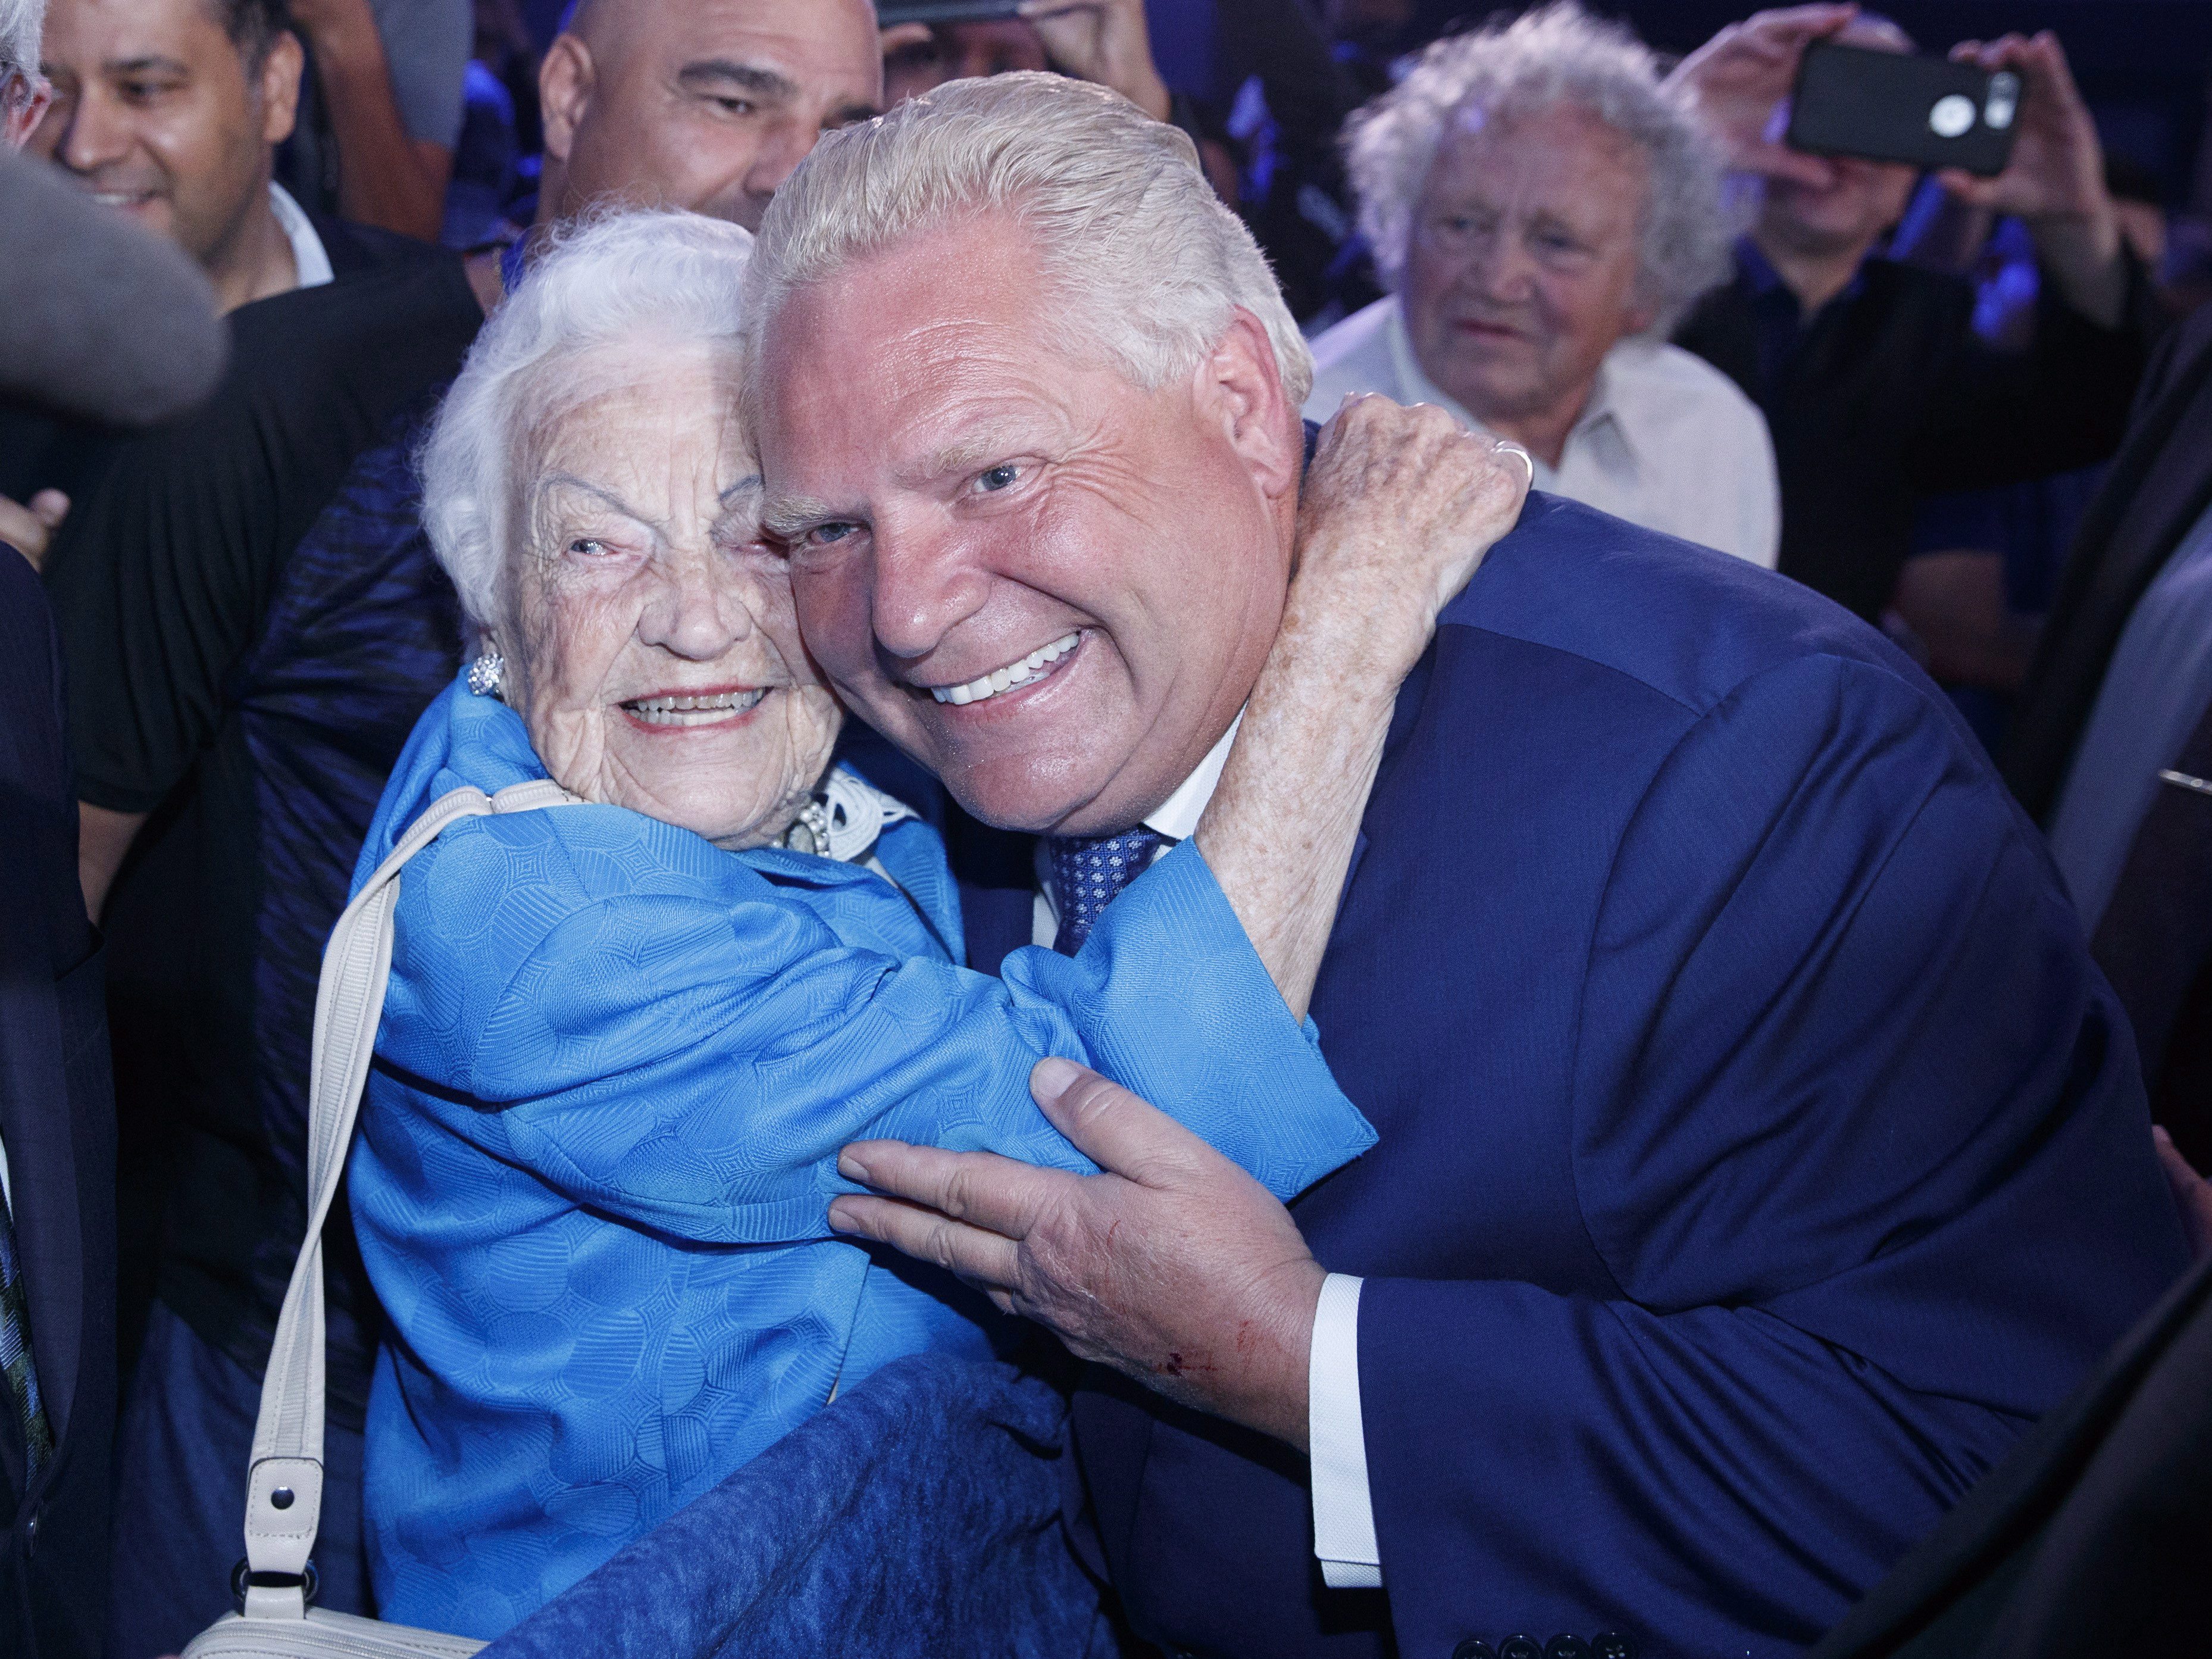 A look at some prominent Tories who will likely join Doug Ford's cabinet